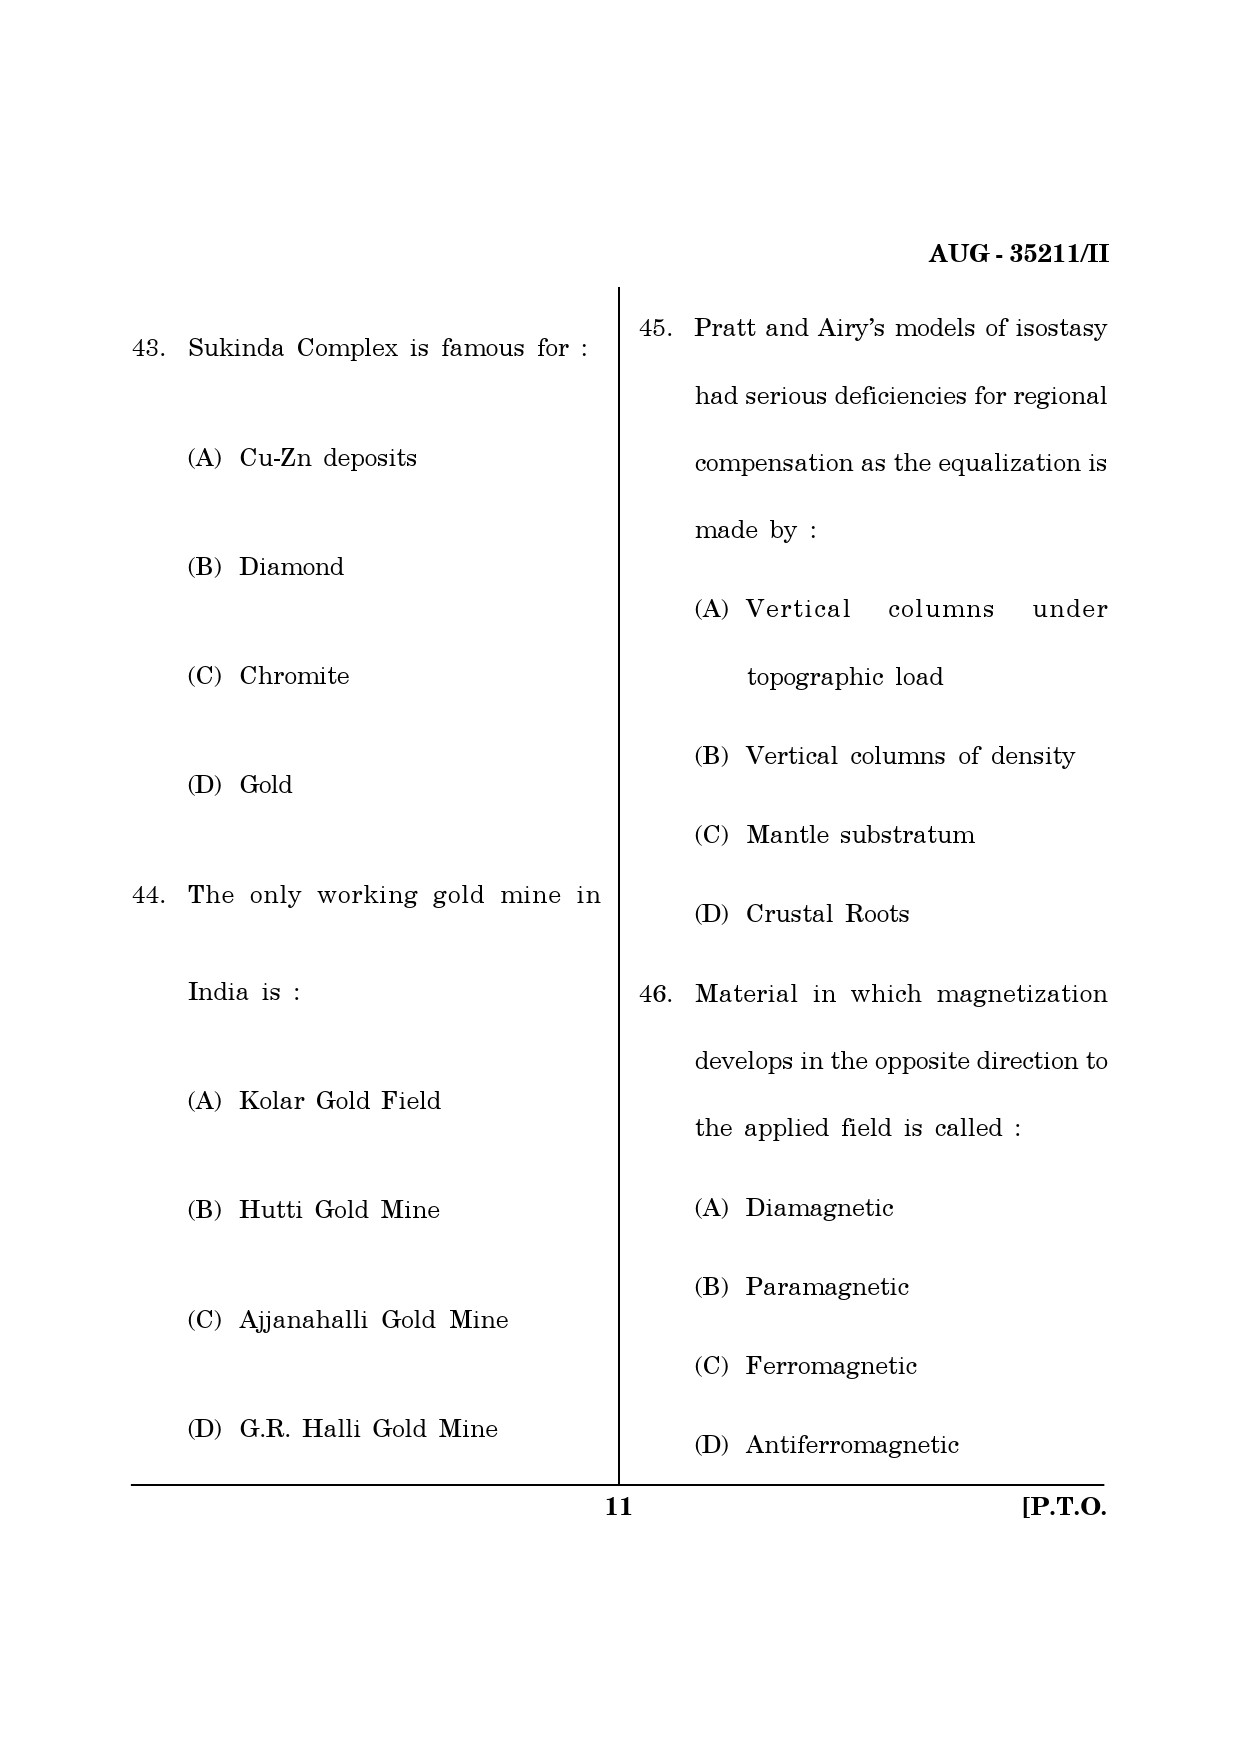 Maharashtra SET Earth Atmospheric Ocean Planetary Science Question Paper II August 2011 11